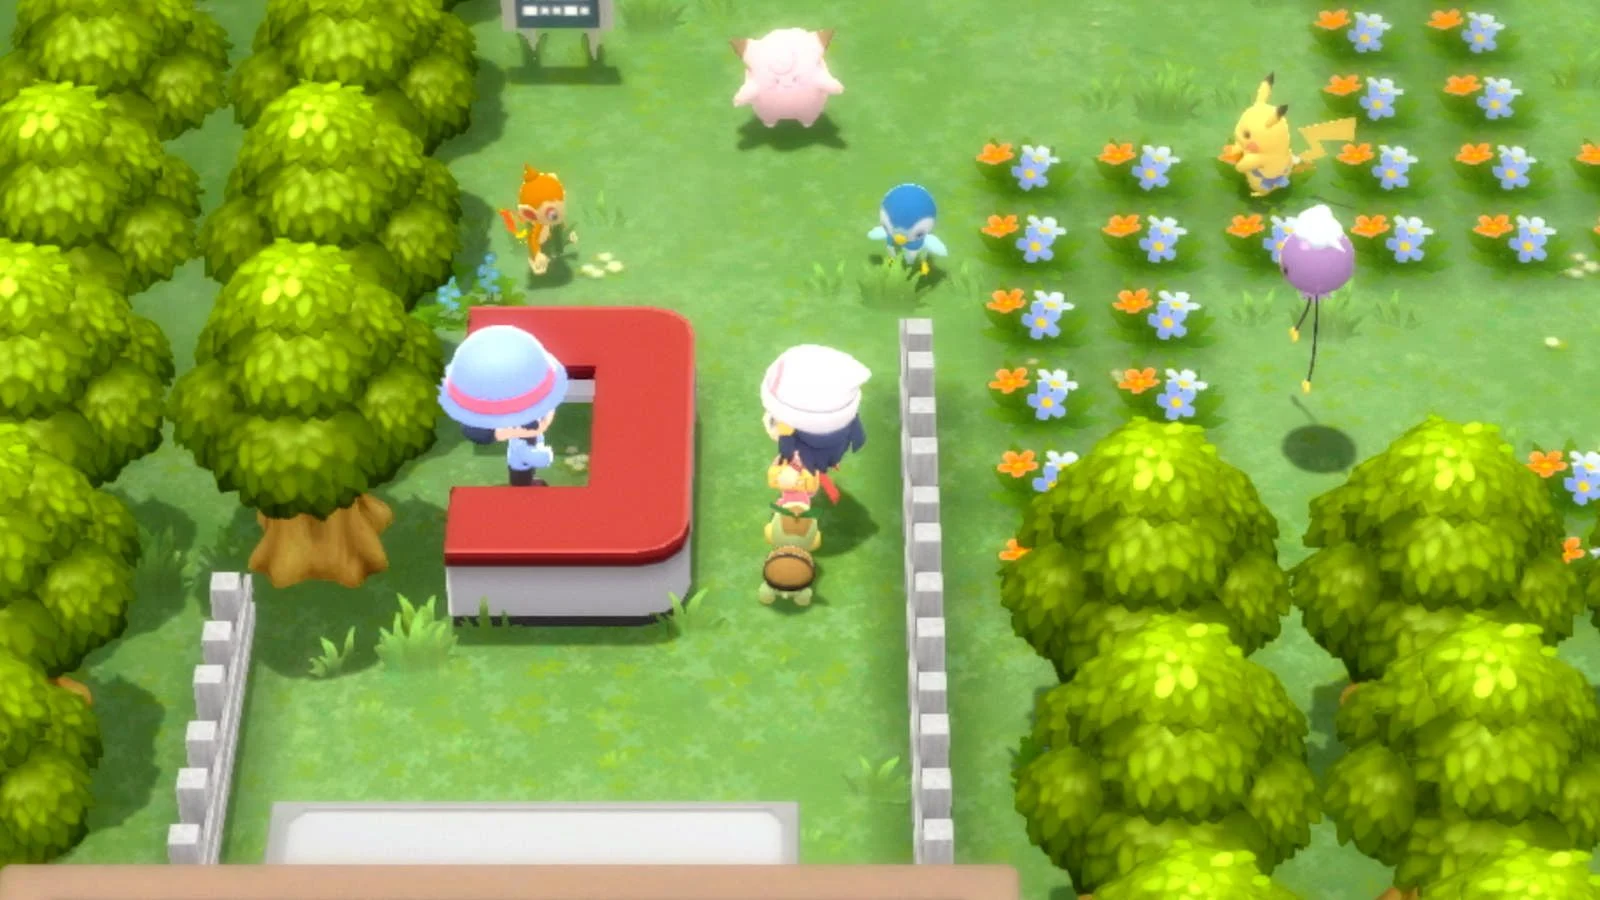 Pokémon Brilliant Diamond and Shining Pearl's Amity Square allow your entire party to follow you